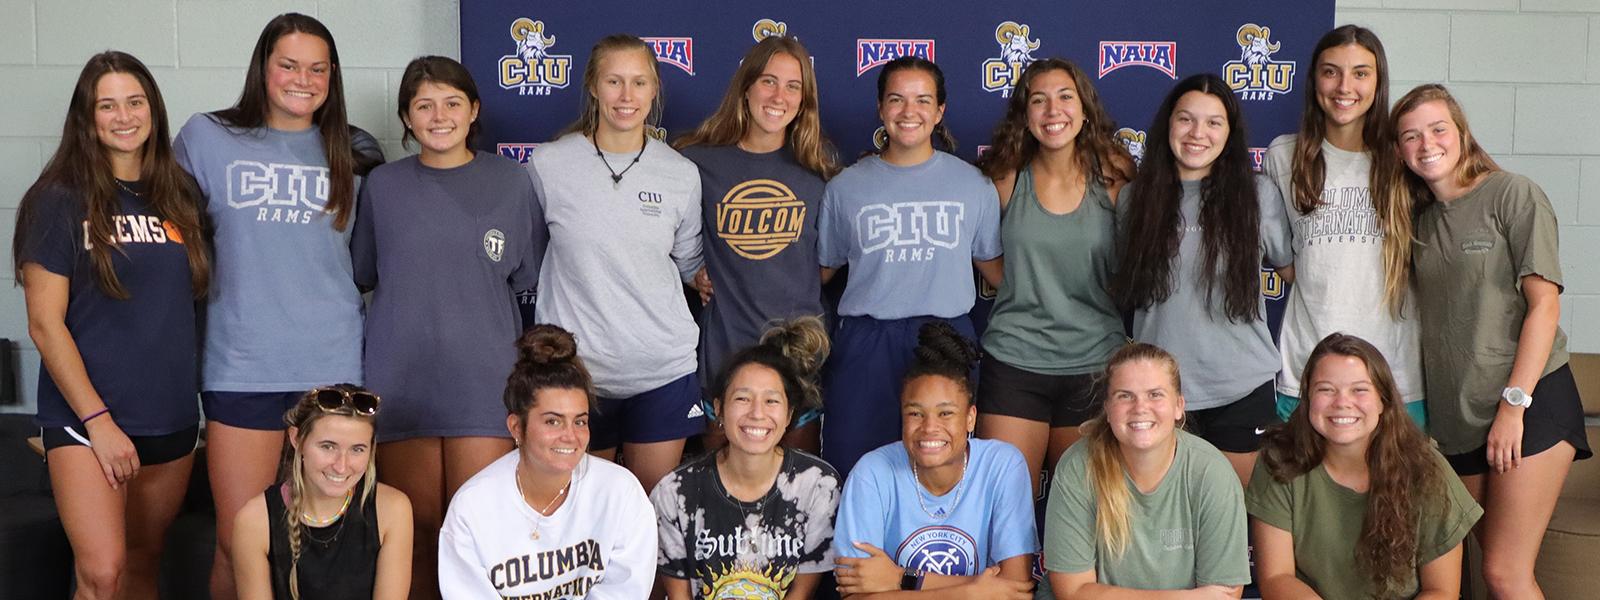 On mission in Costa Rica: CIU women's soccer. (Photos by Kierston Smith)